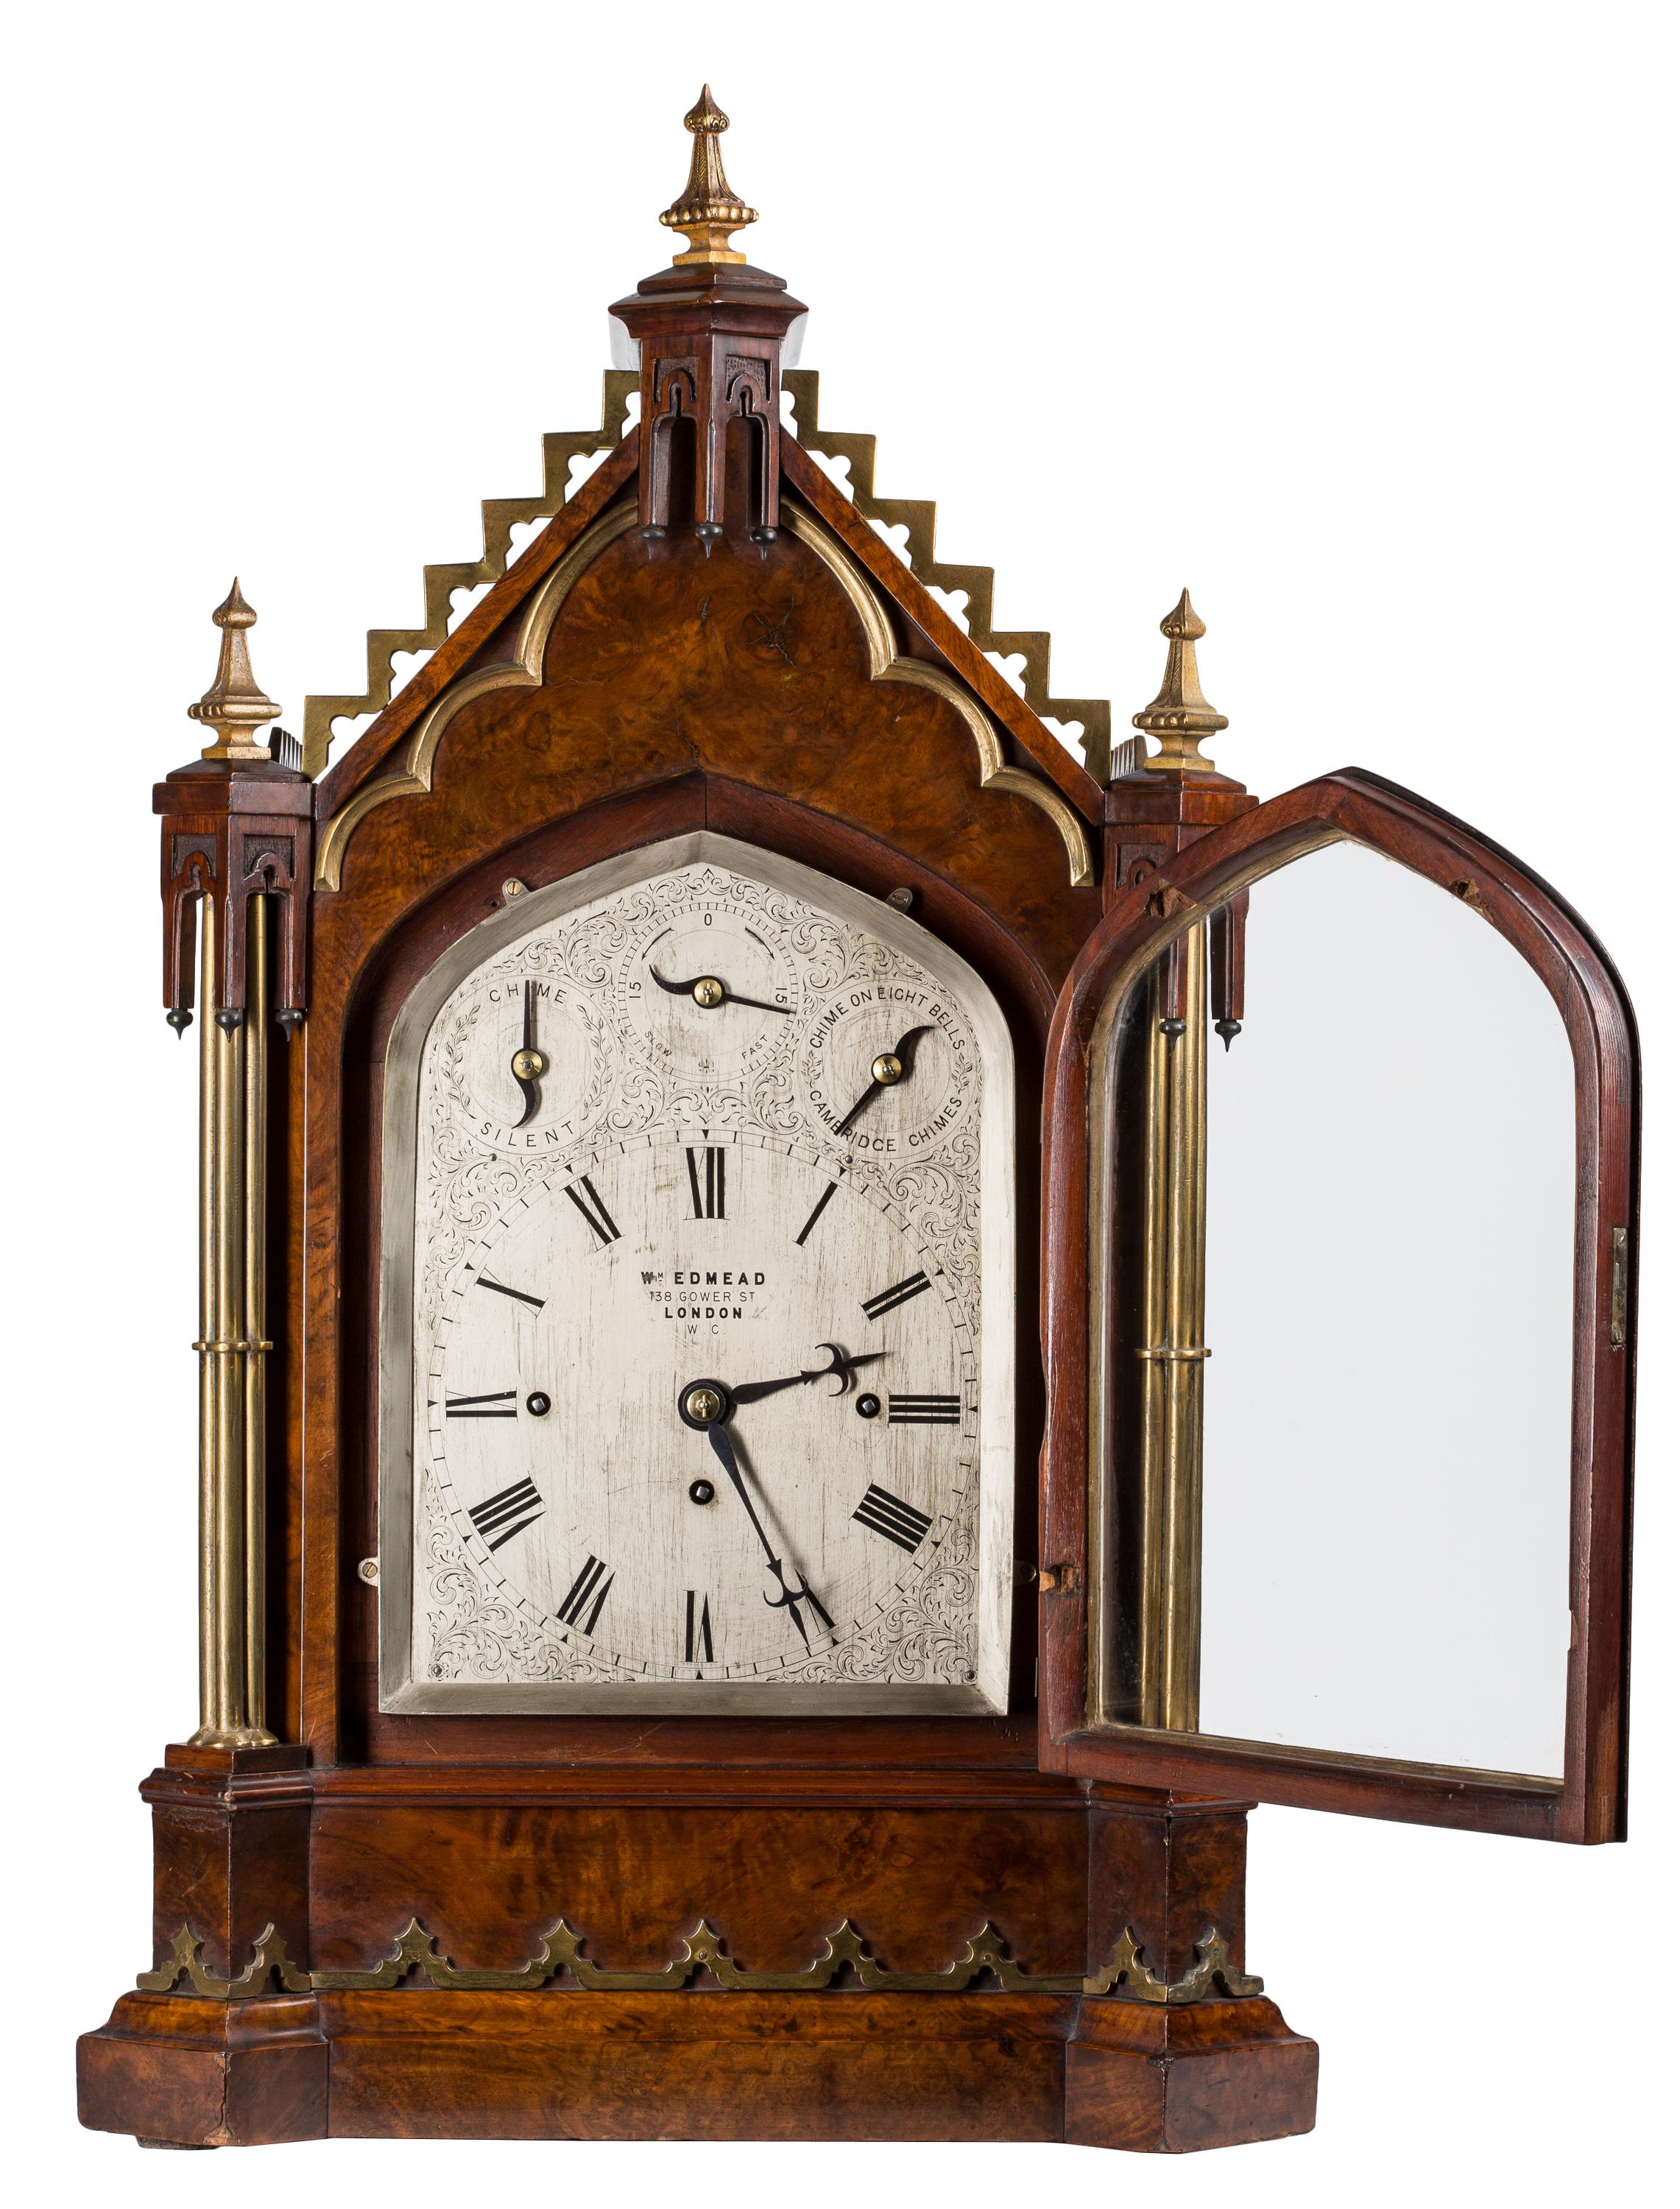 A 19th century English Victorian Gothic Revival mantel clock with dramatic architectural silhouette, reminiscent of a Gothic cathedral complete with spires, pinnacles, columns and pointed arches. Richly-grained burl wood contrasting with sculptural